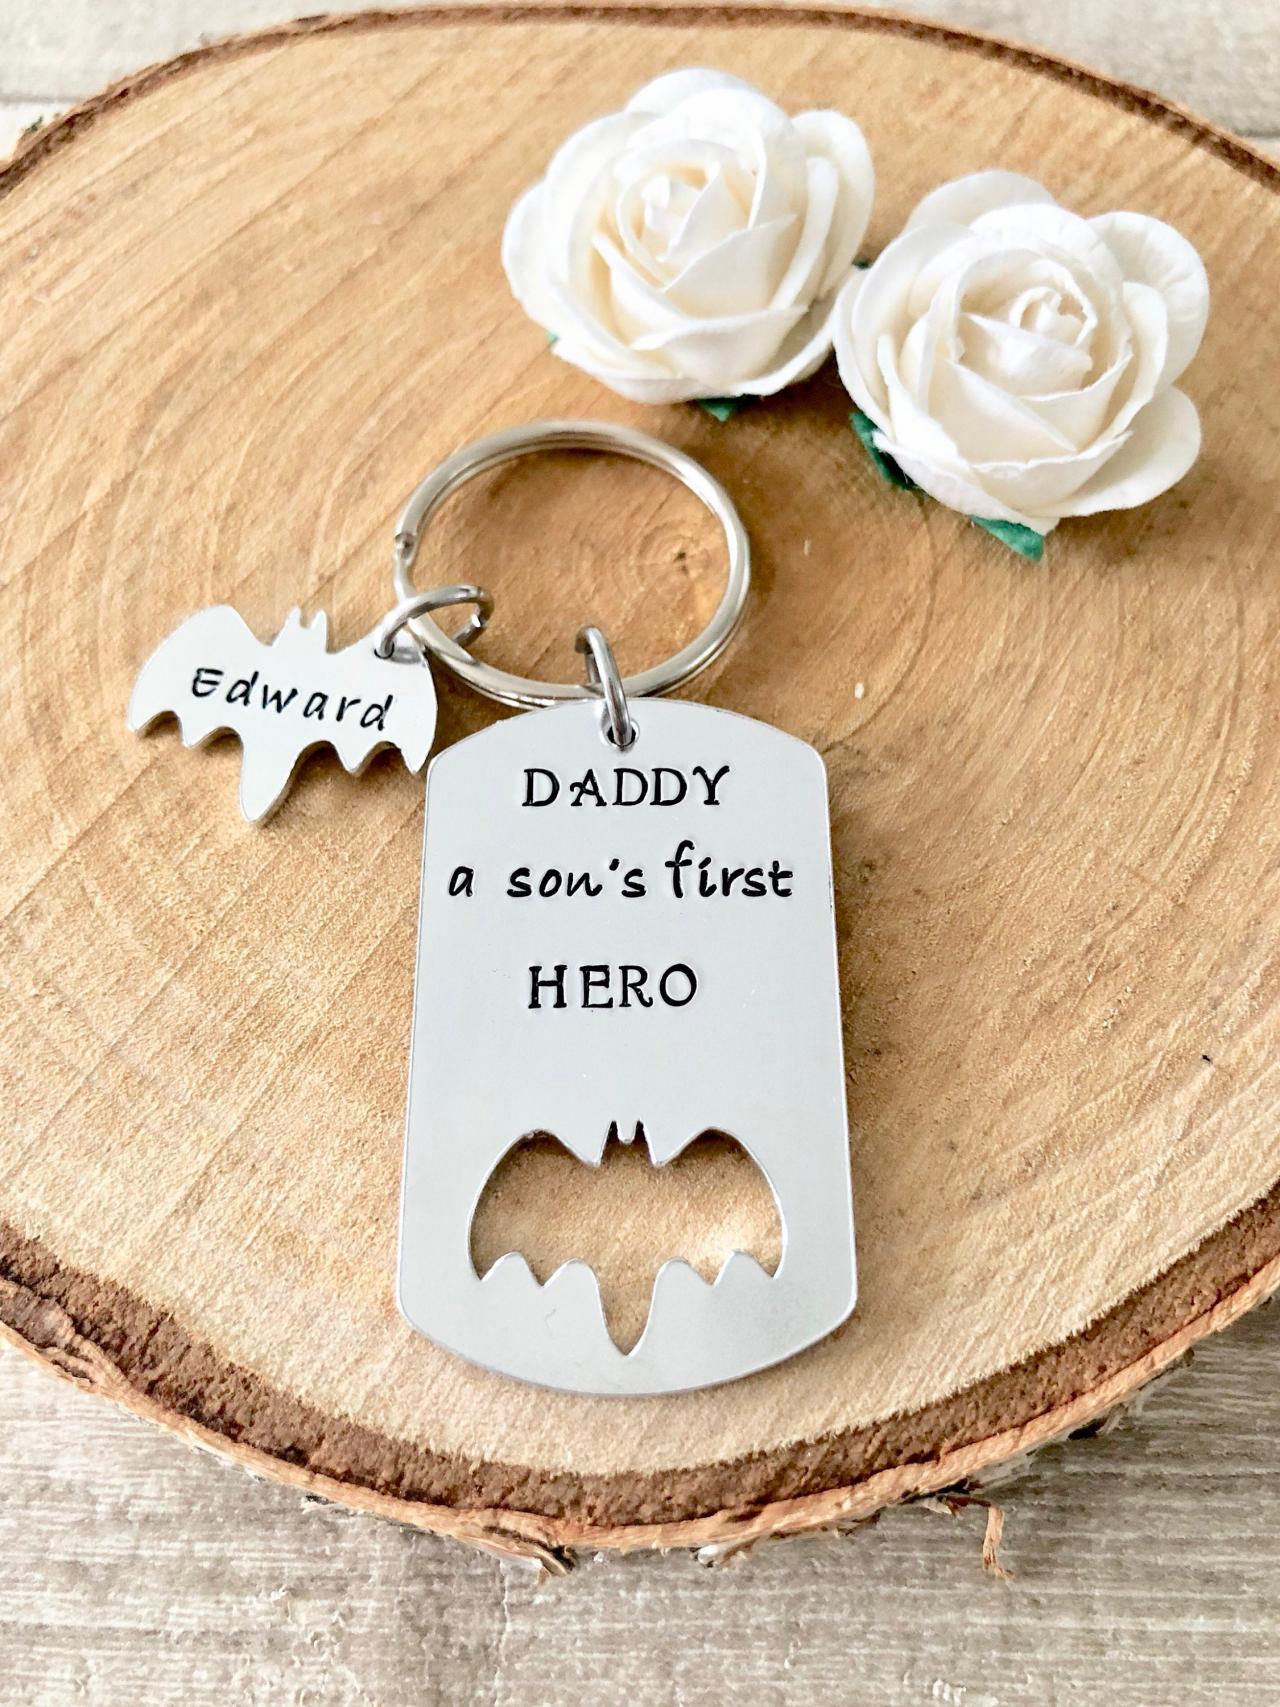 Dad Gift, Gift for Dad, Daddy Gift, New Dad, New Baby, gift from son, dad birthday gift, father's day gift, gift for daddy, dad keychain.